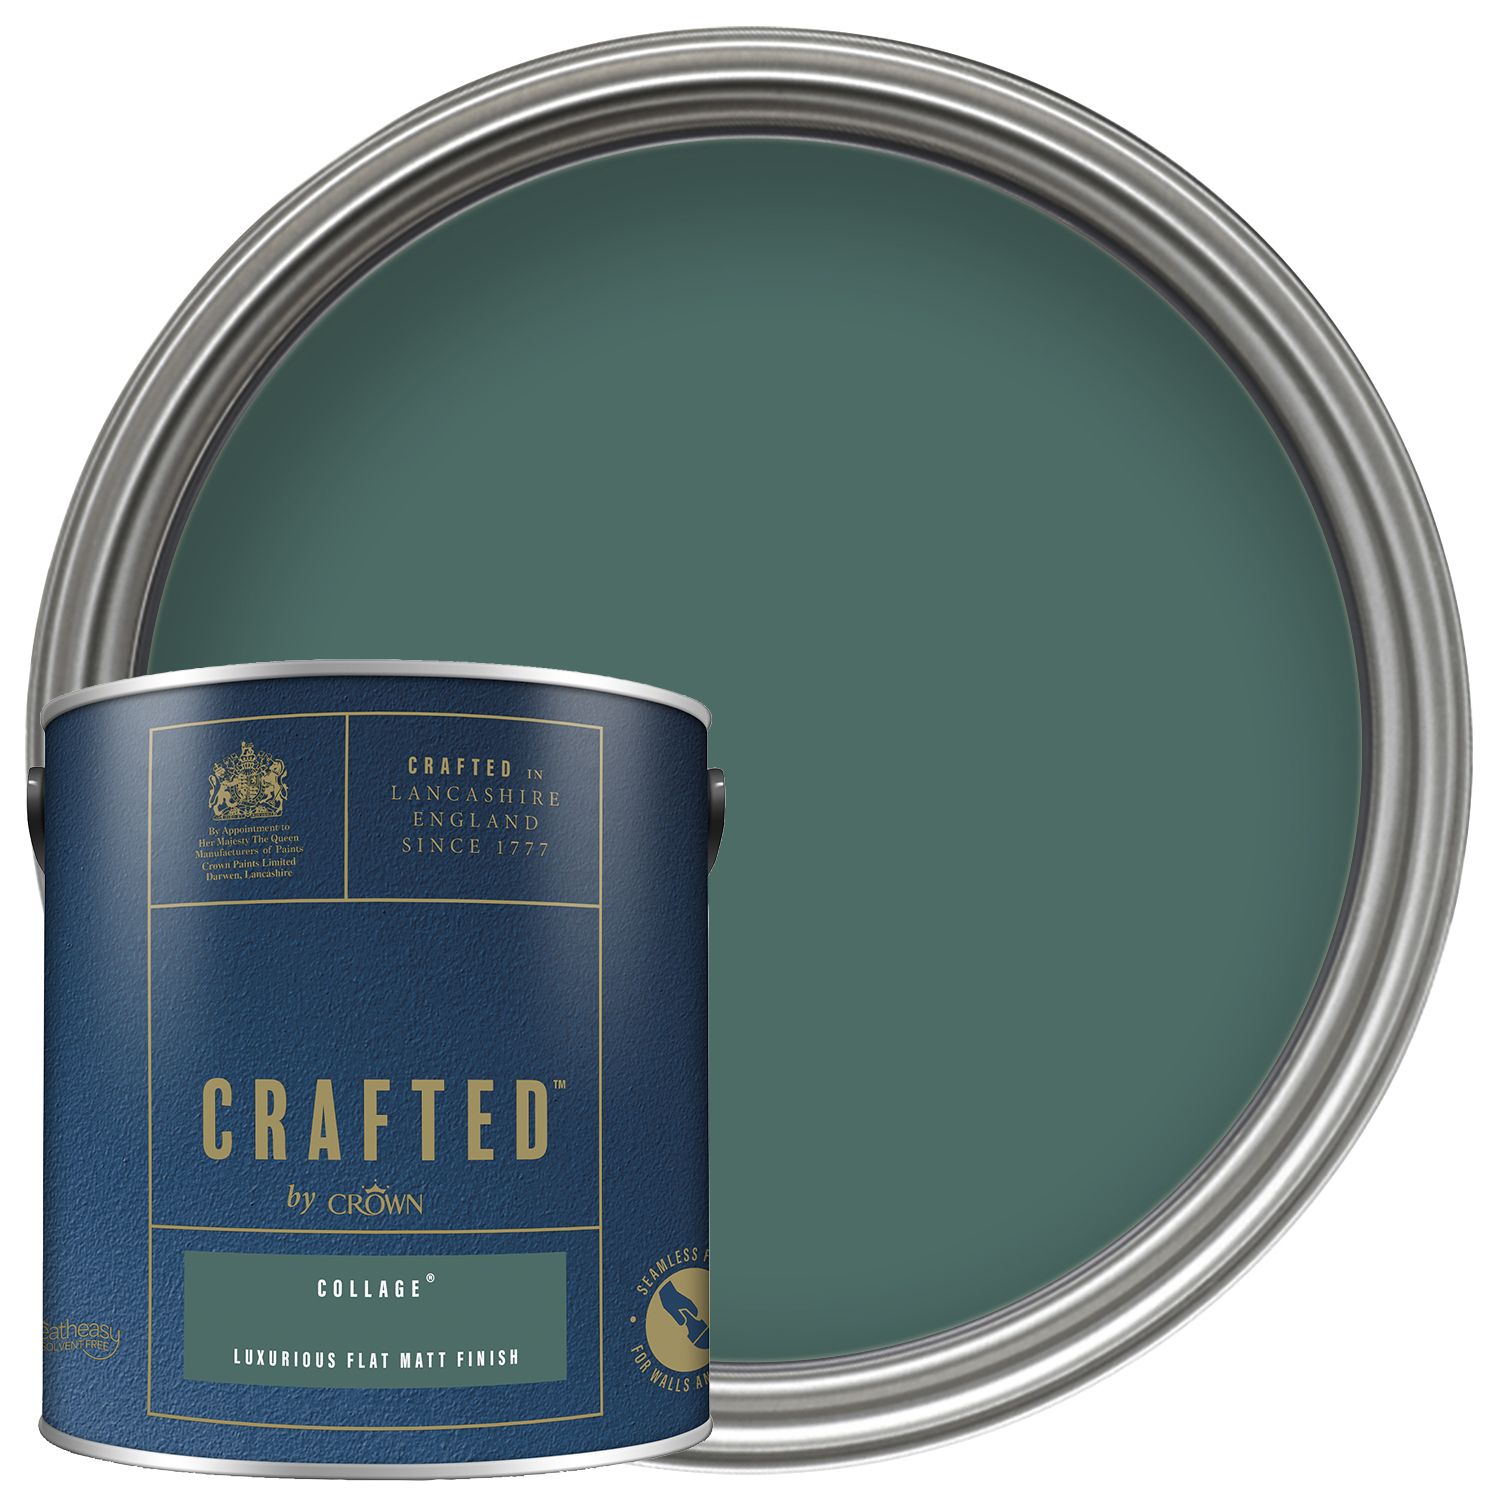 CRAFTED™ by Crown Flat Matt Emulsion Interior Paint - Collage™ - 2.5L